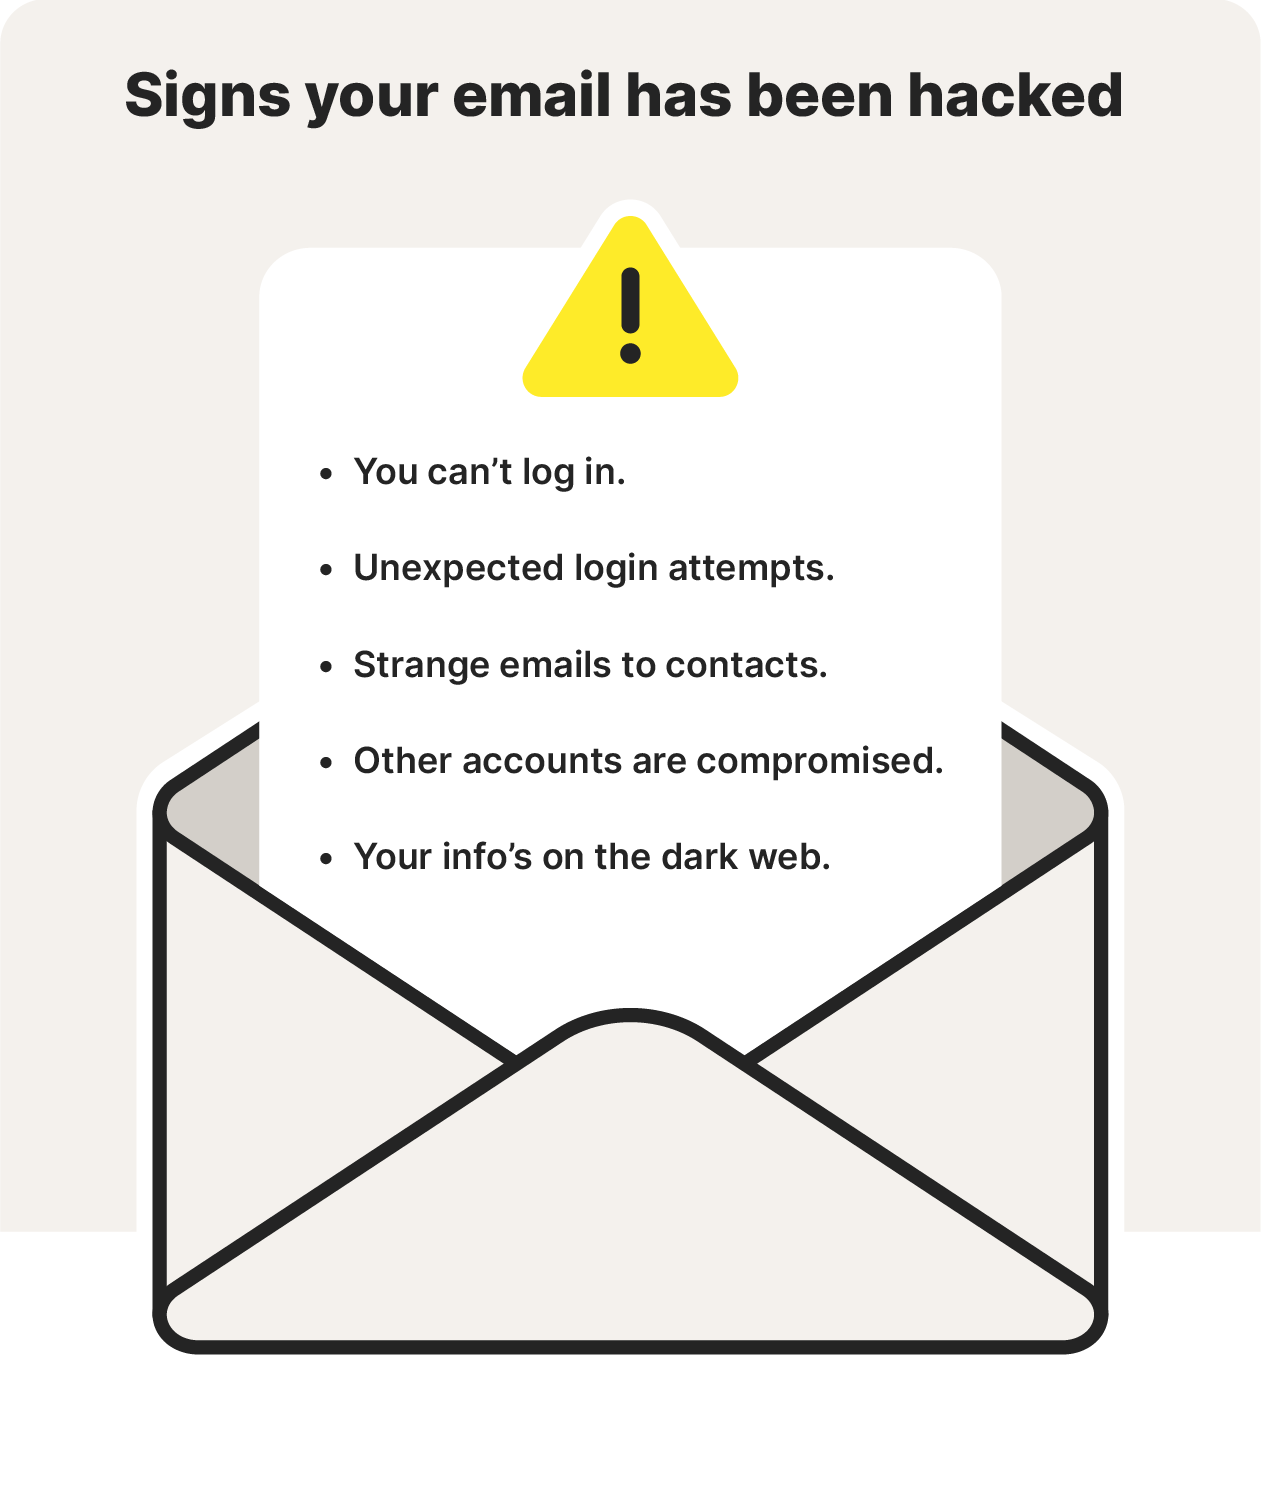 A graphic listing the signs that your email has been hacked.